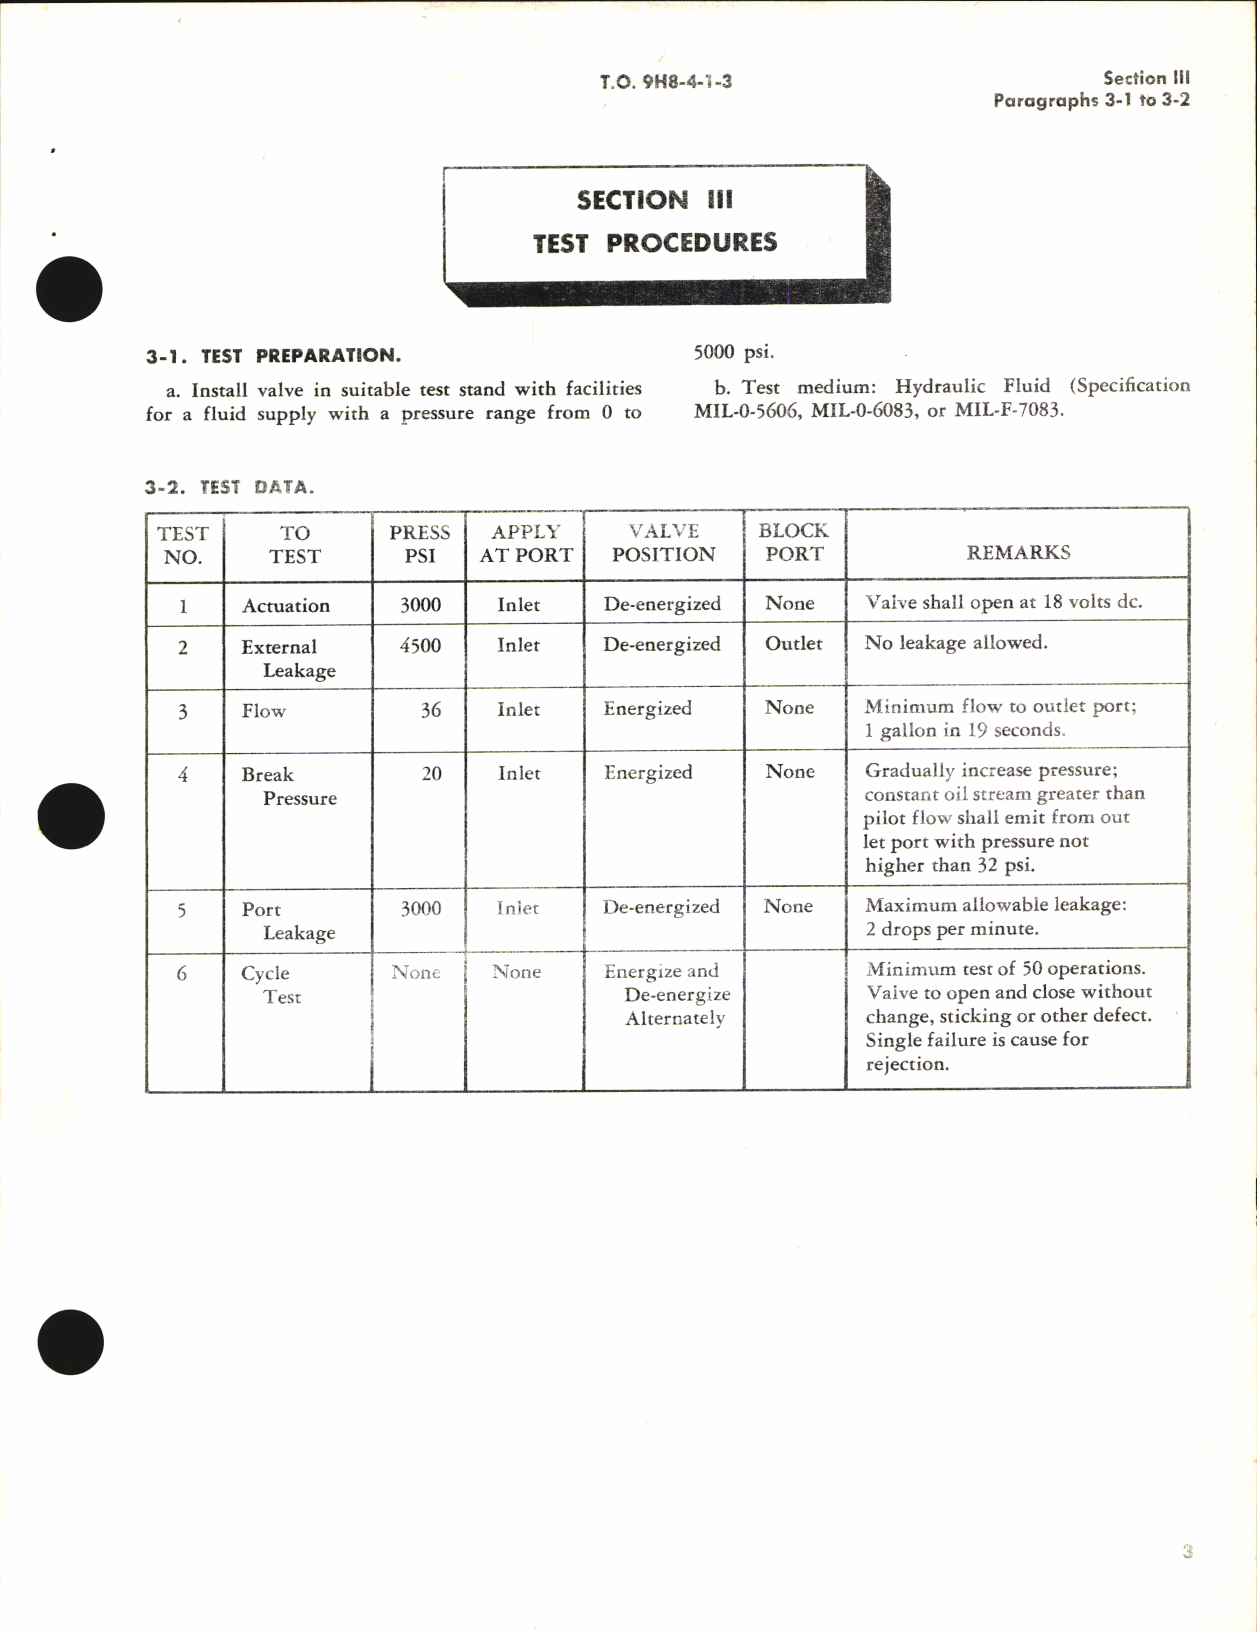 Sample page 7 from AirCorps Library document: Overhaul Instructions for Electromagnetic Pilot Operated Valve Av-9 Series, Part no. Av-9A1105 and Similar Valves